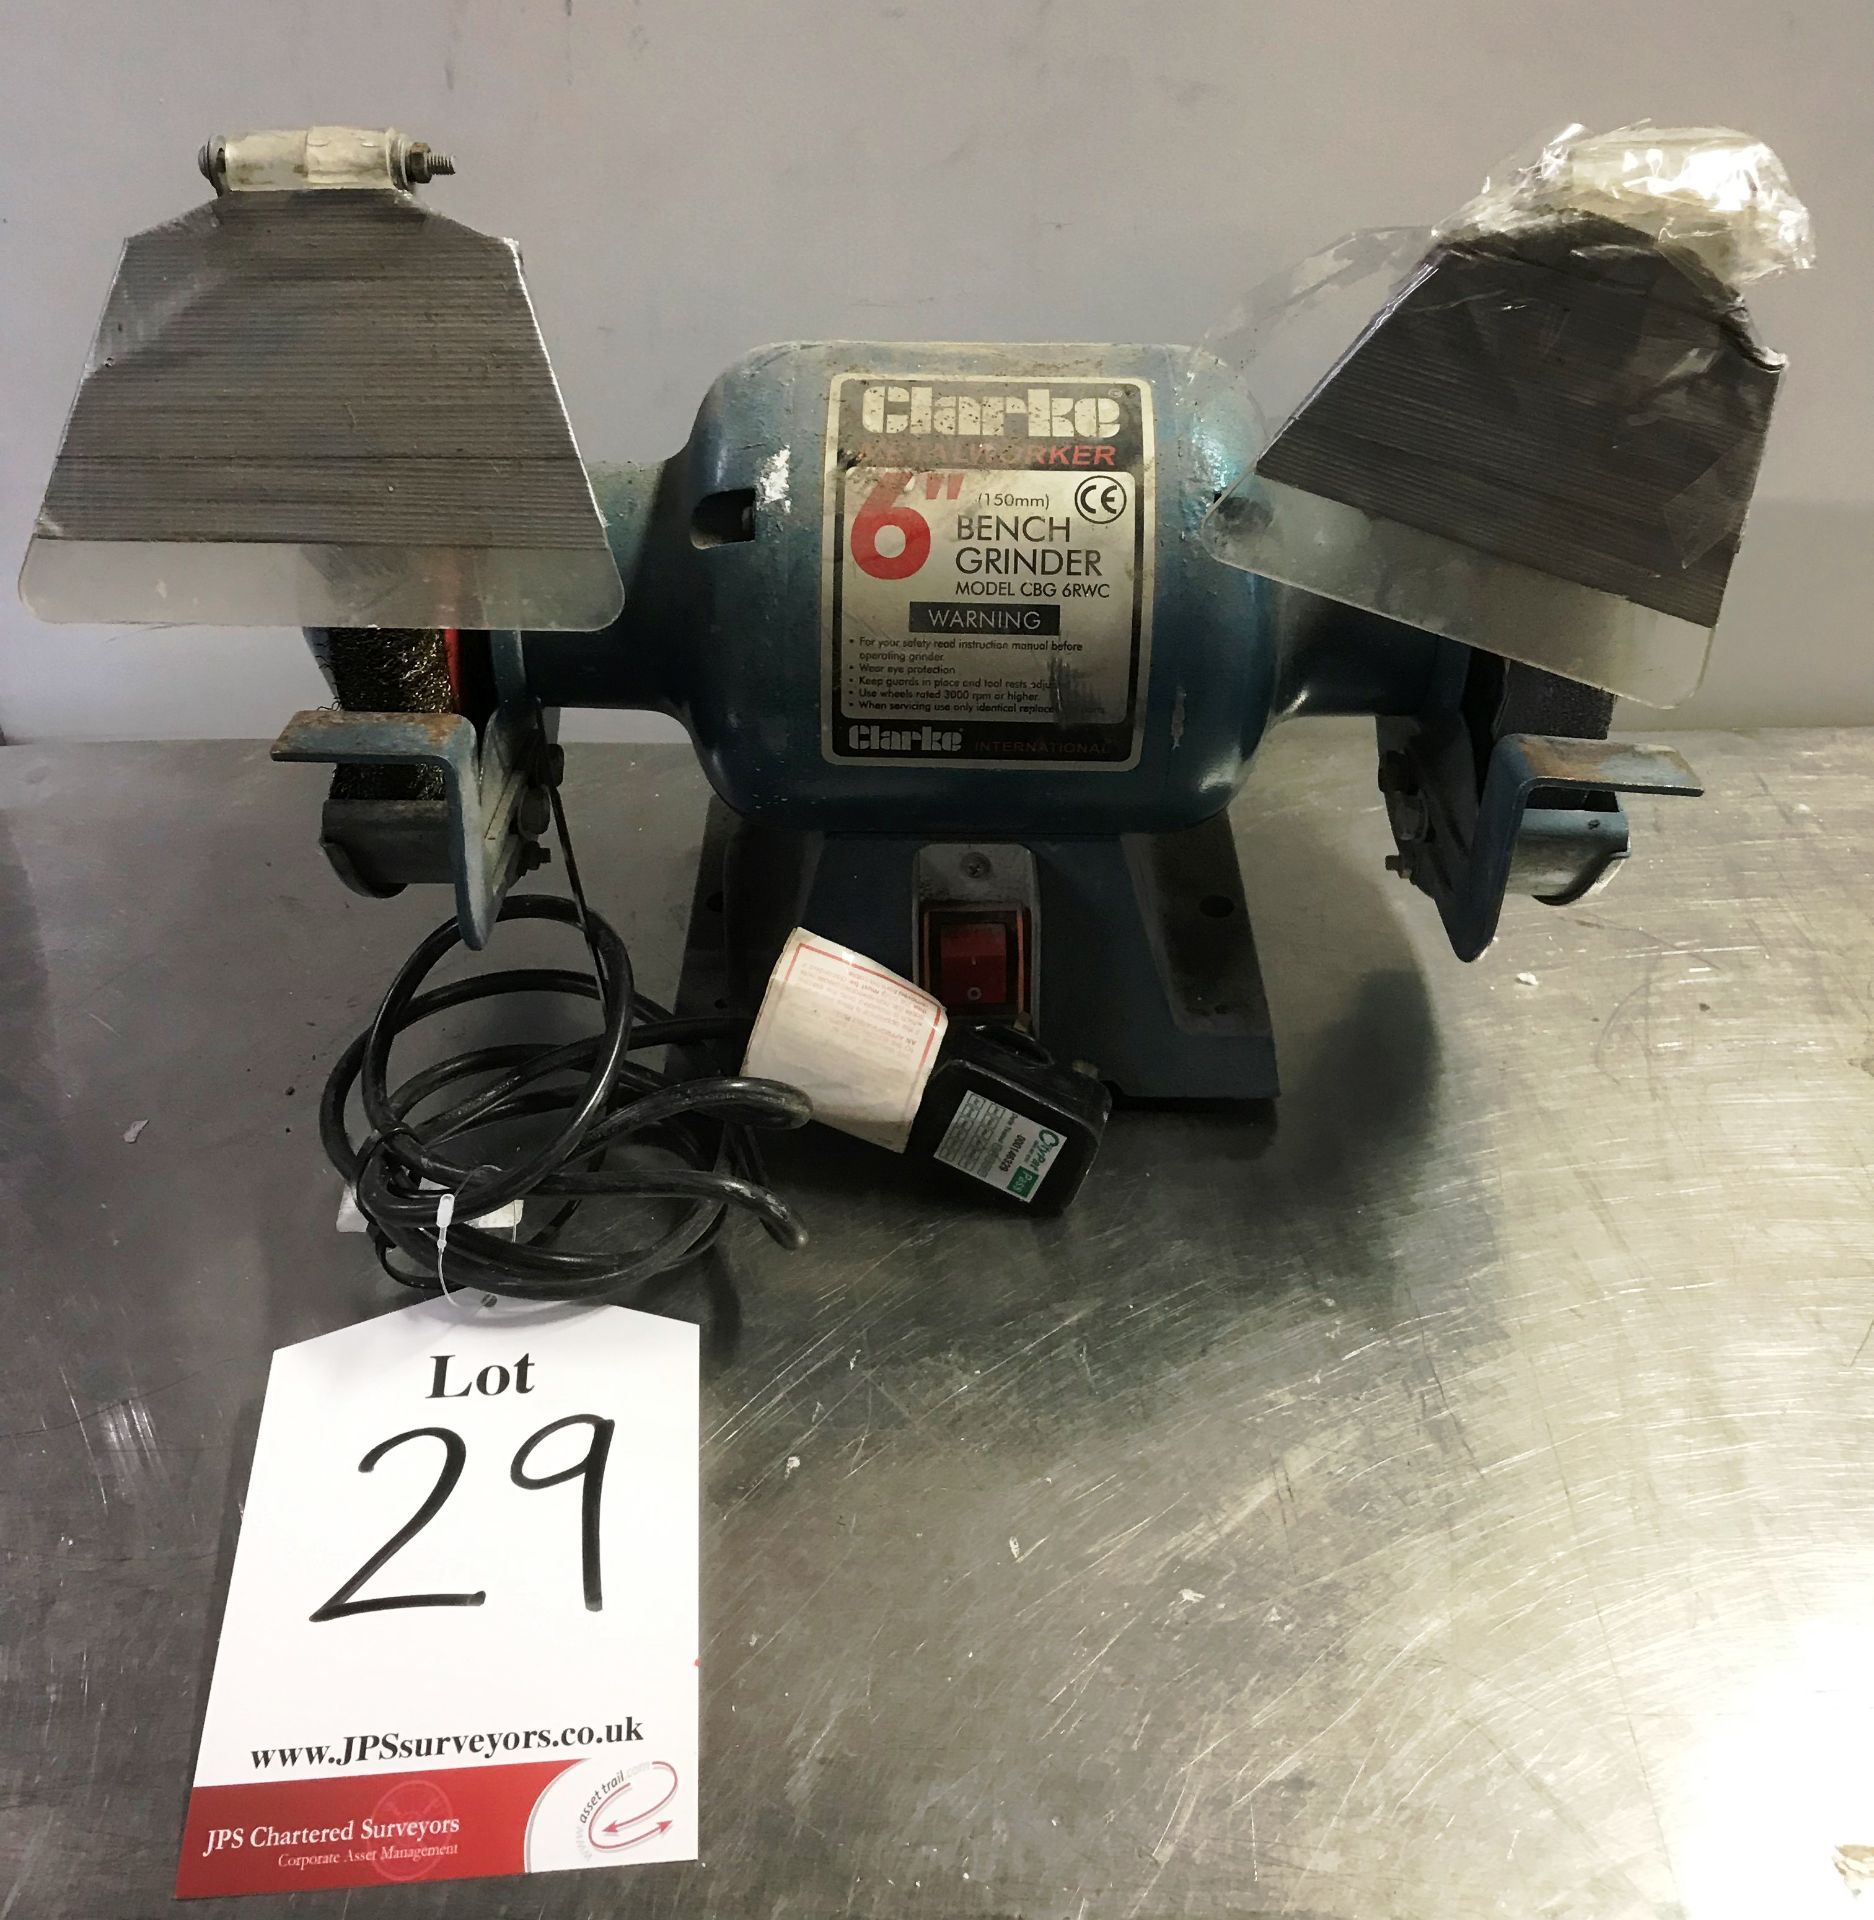 Clarke 6" CBG 6RWC double ended bench grinder